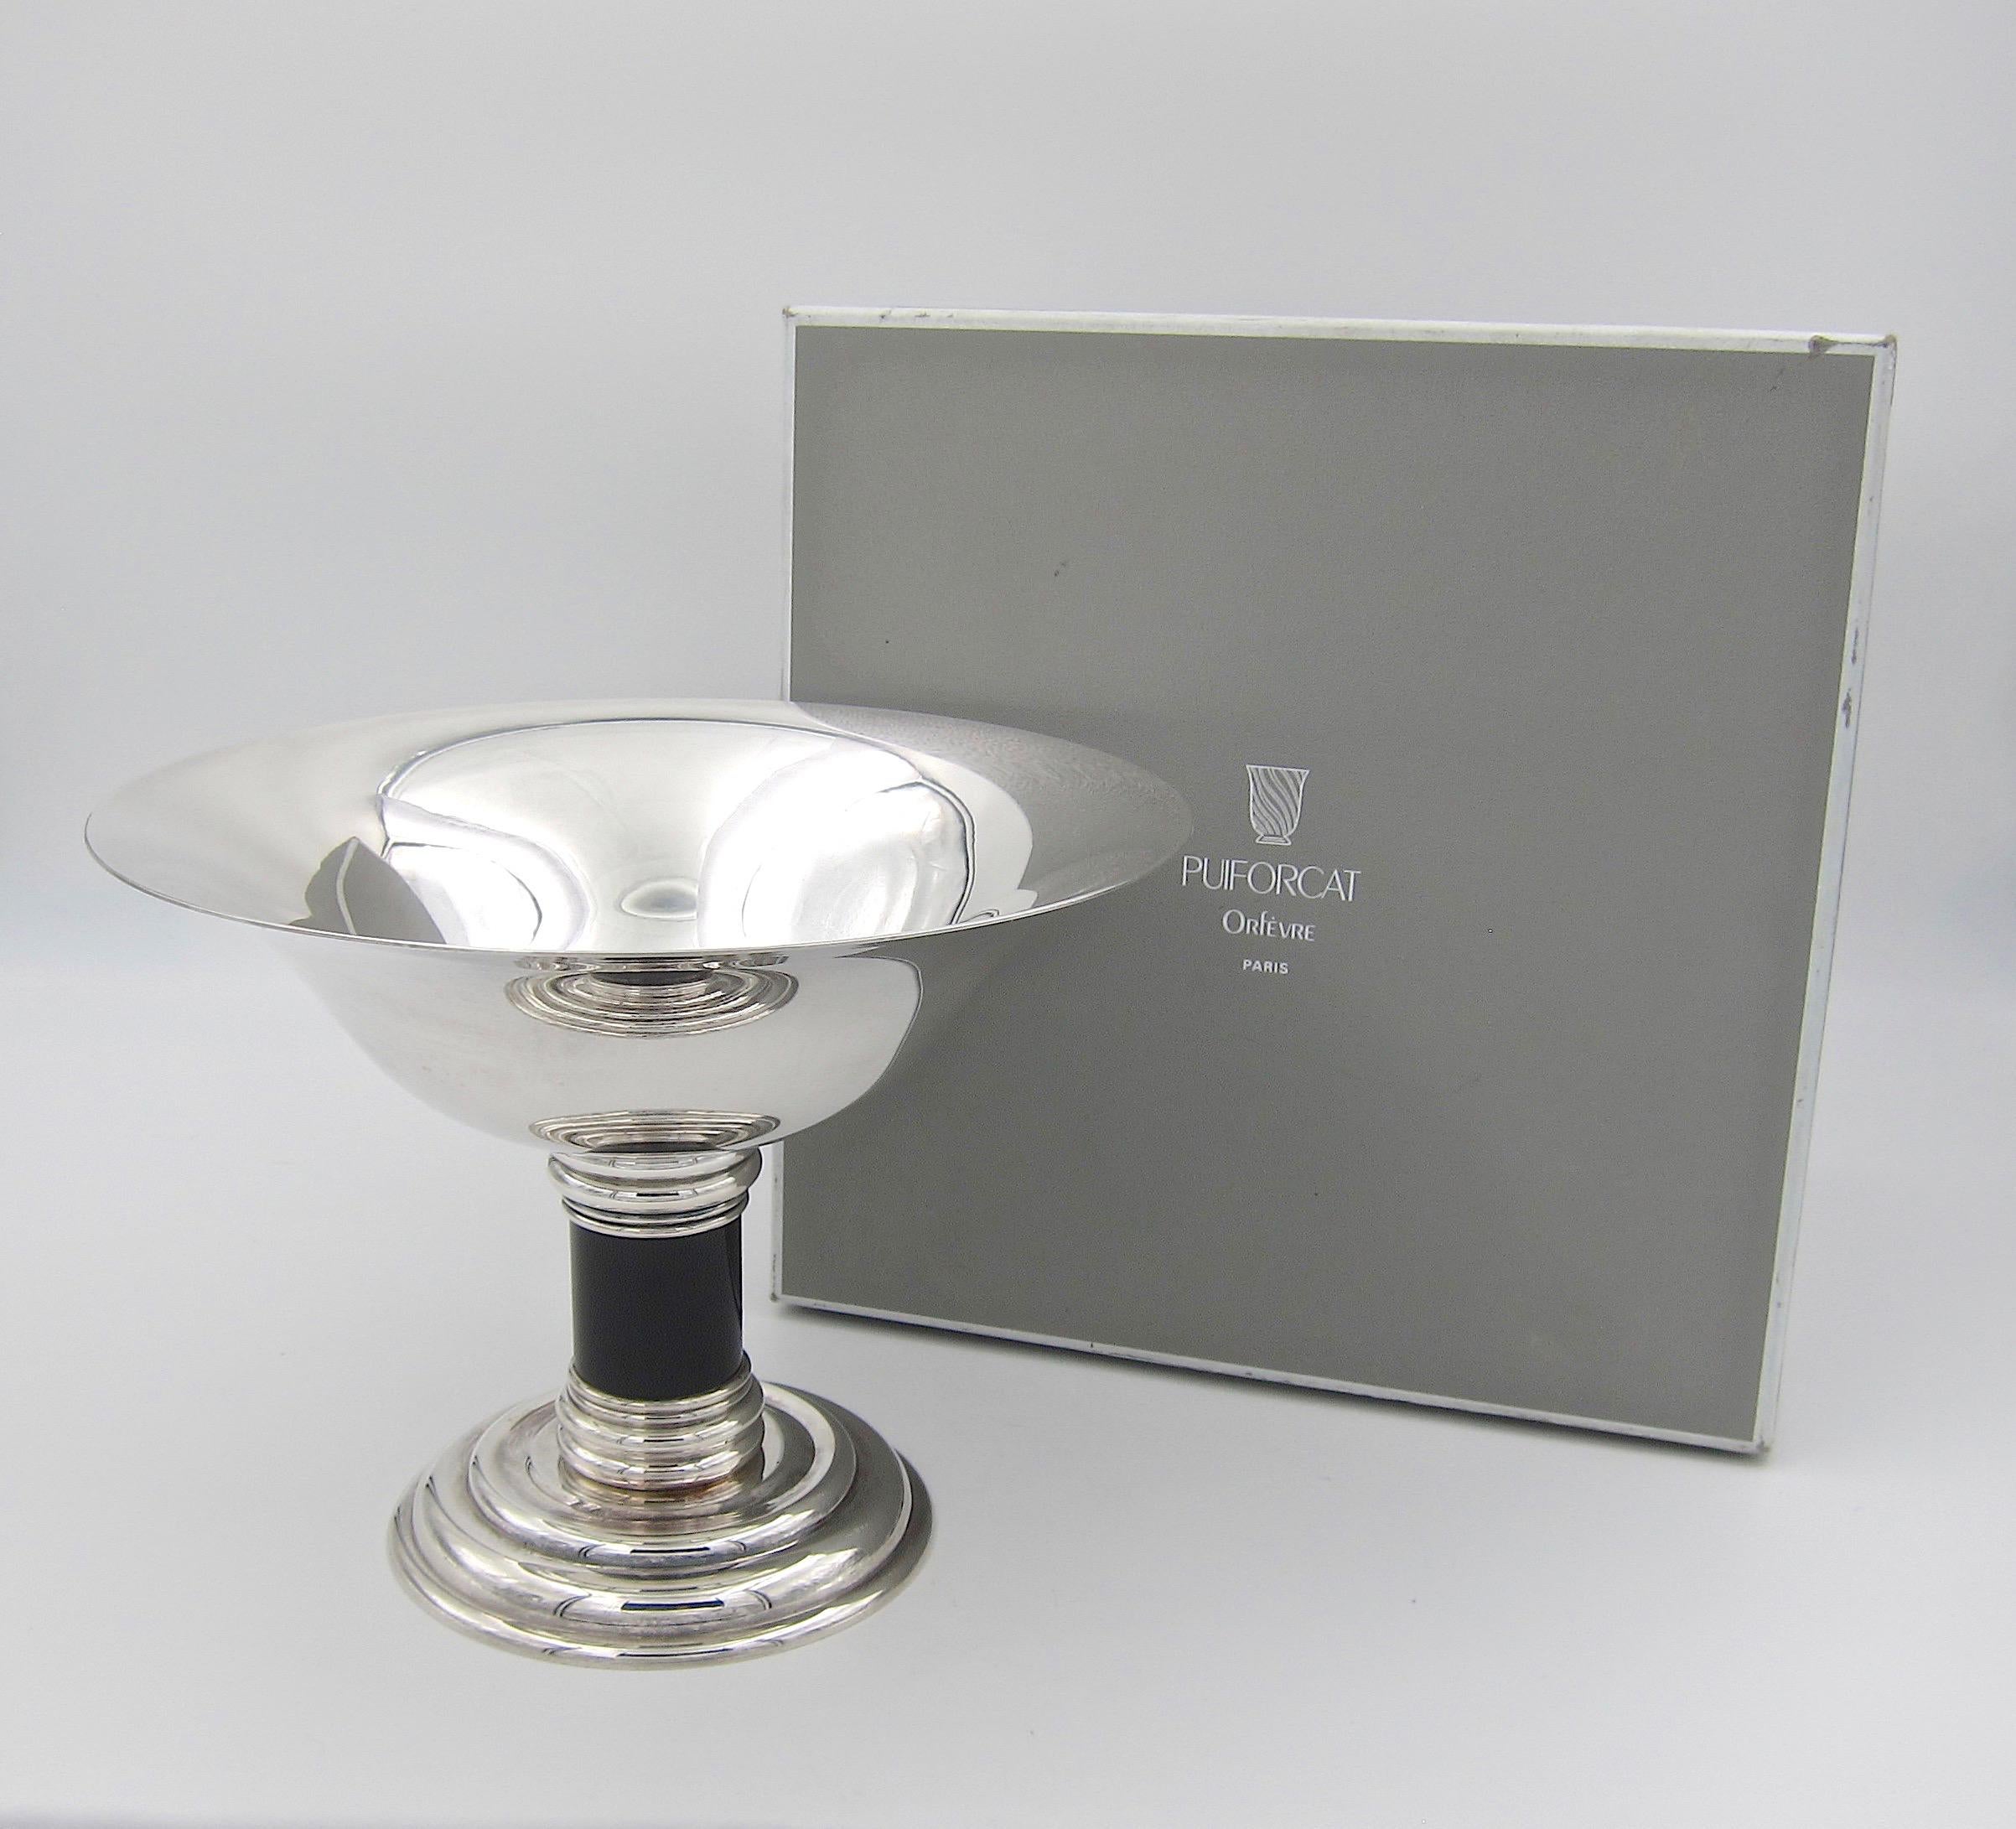 A large and elegant Art Deco flaring compote designed by Jean E. Puiforcat (1897-1945) in the 1930s for renowned silversmiths Puiforcat of Paris; the firm produced the form for several decades during the 20th century. The piece resembles an